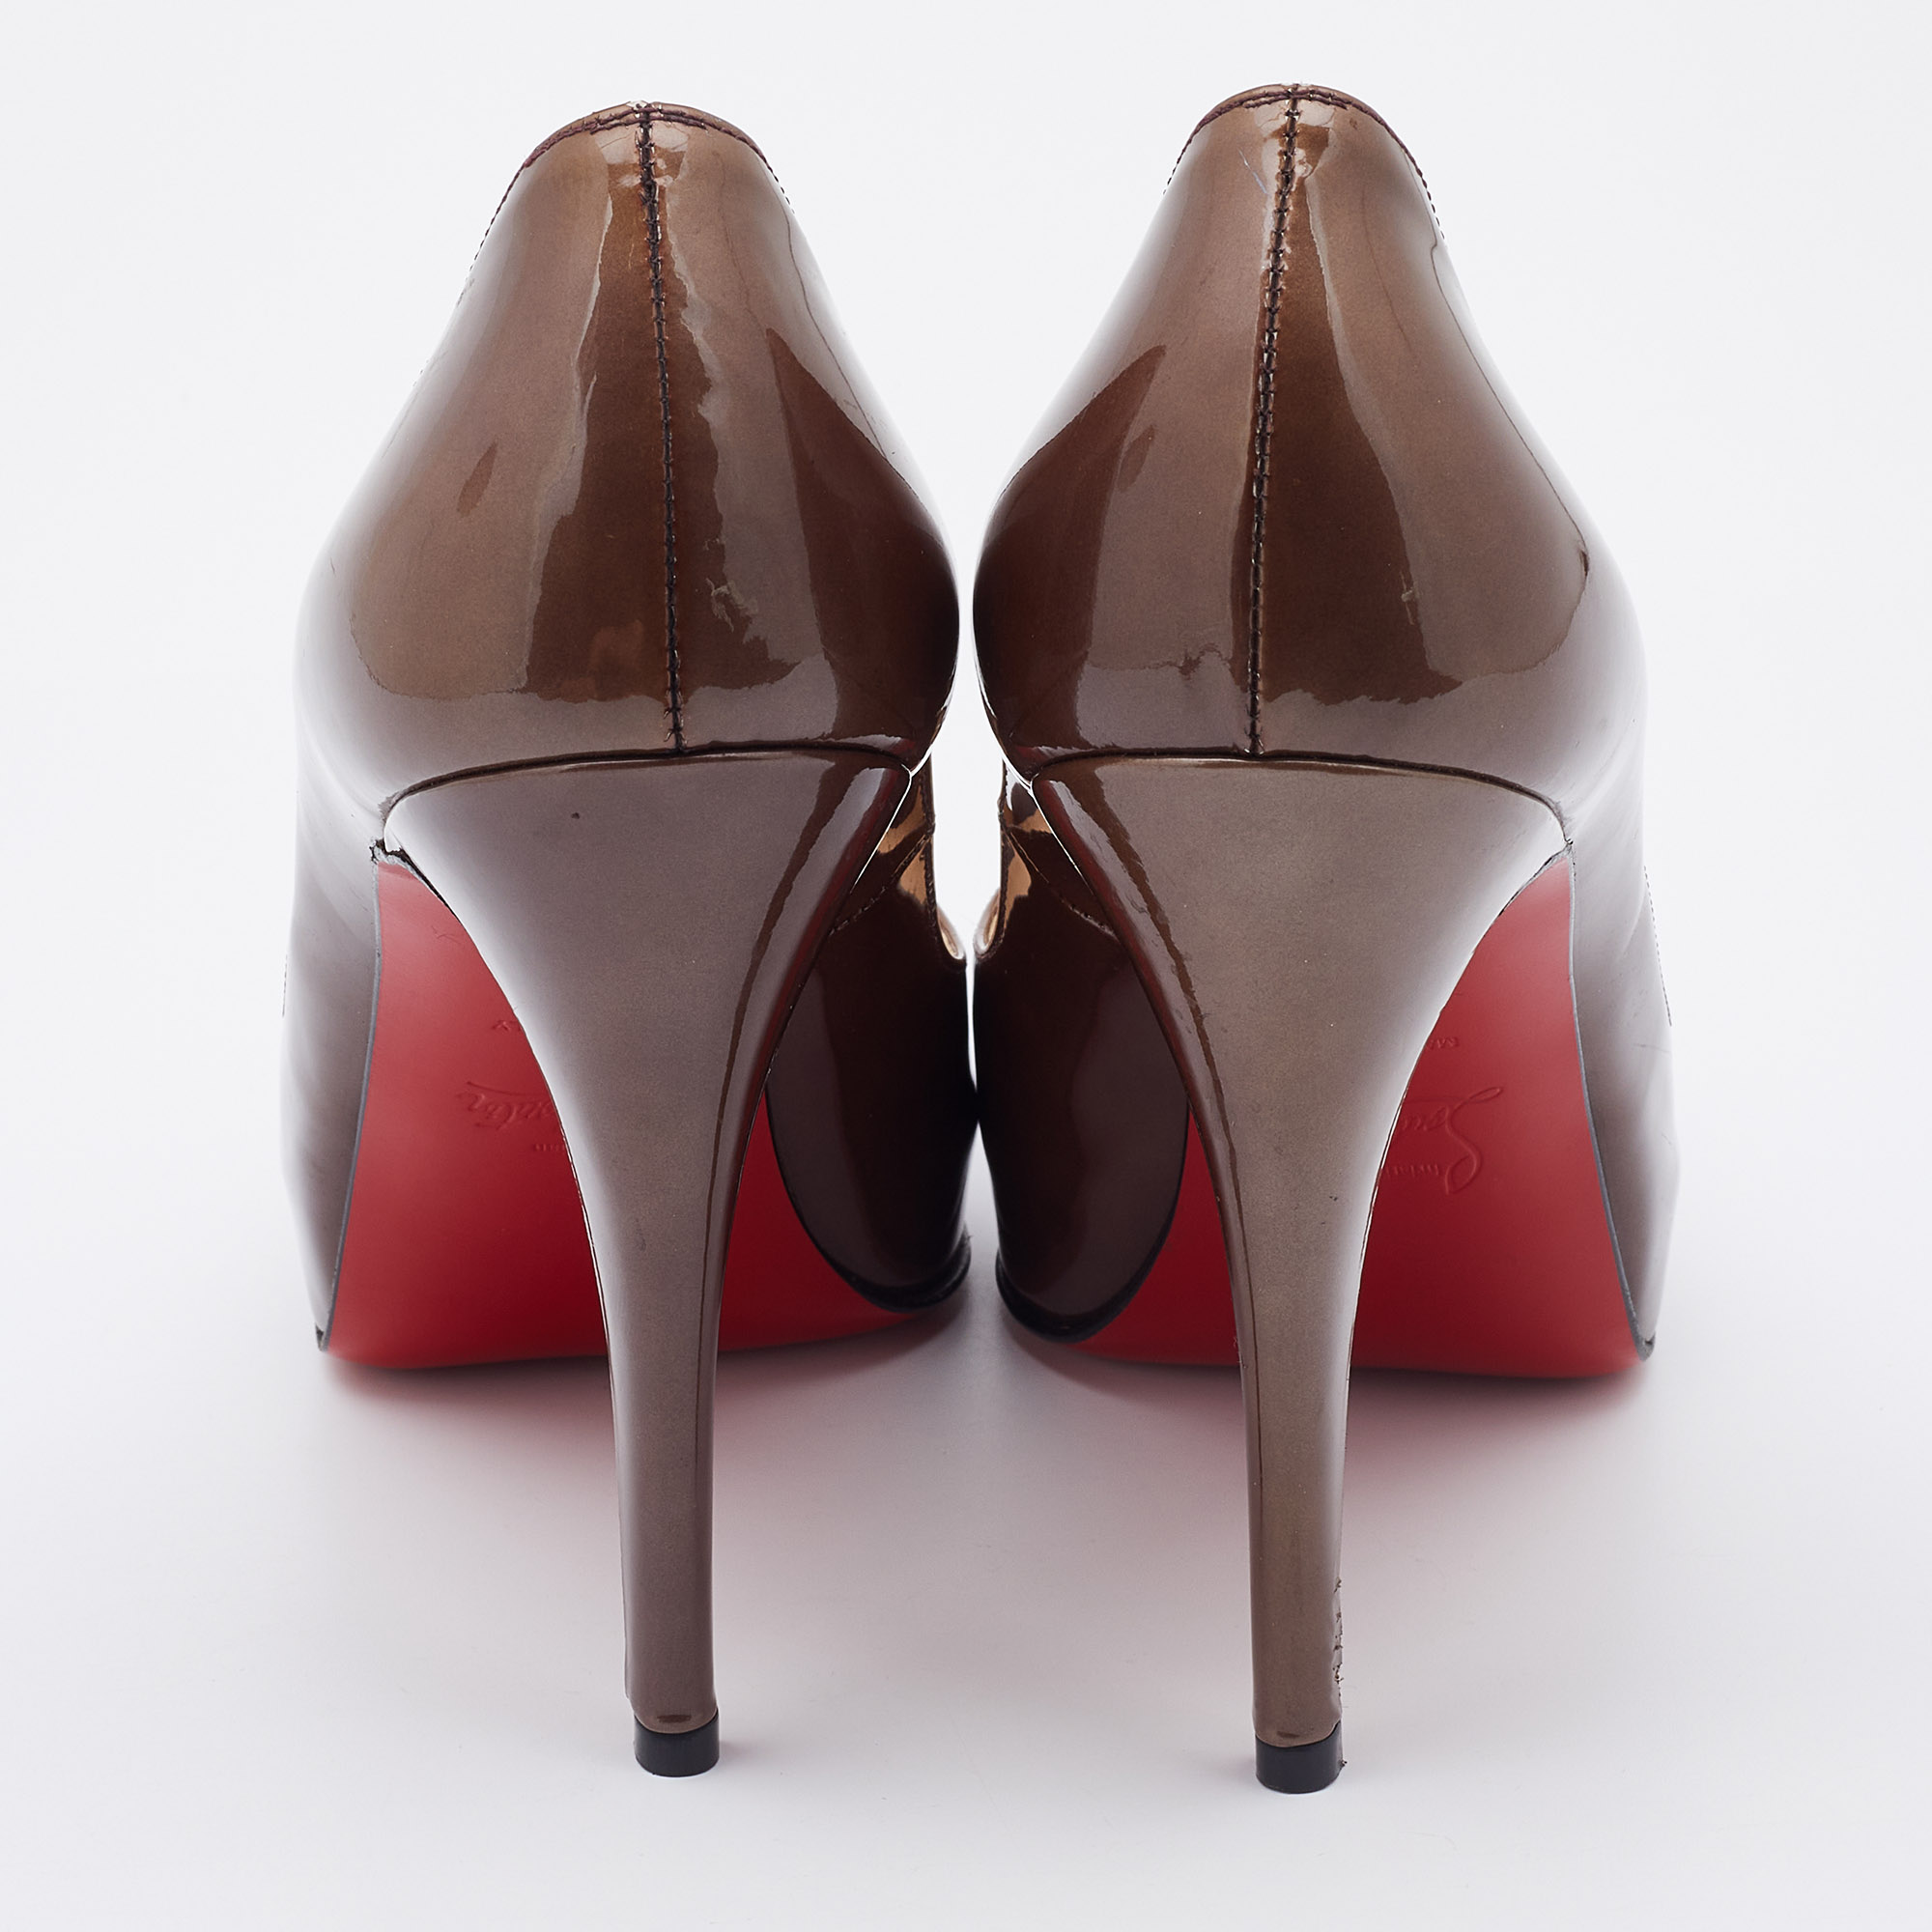 Christian Louboutin Brown Patent Leather New Very Prive Pumps Size 38.5